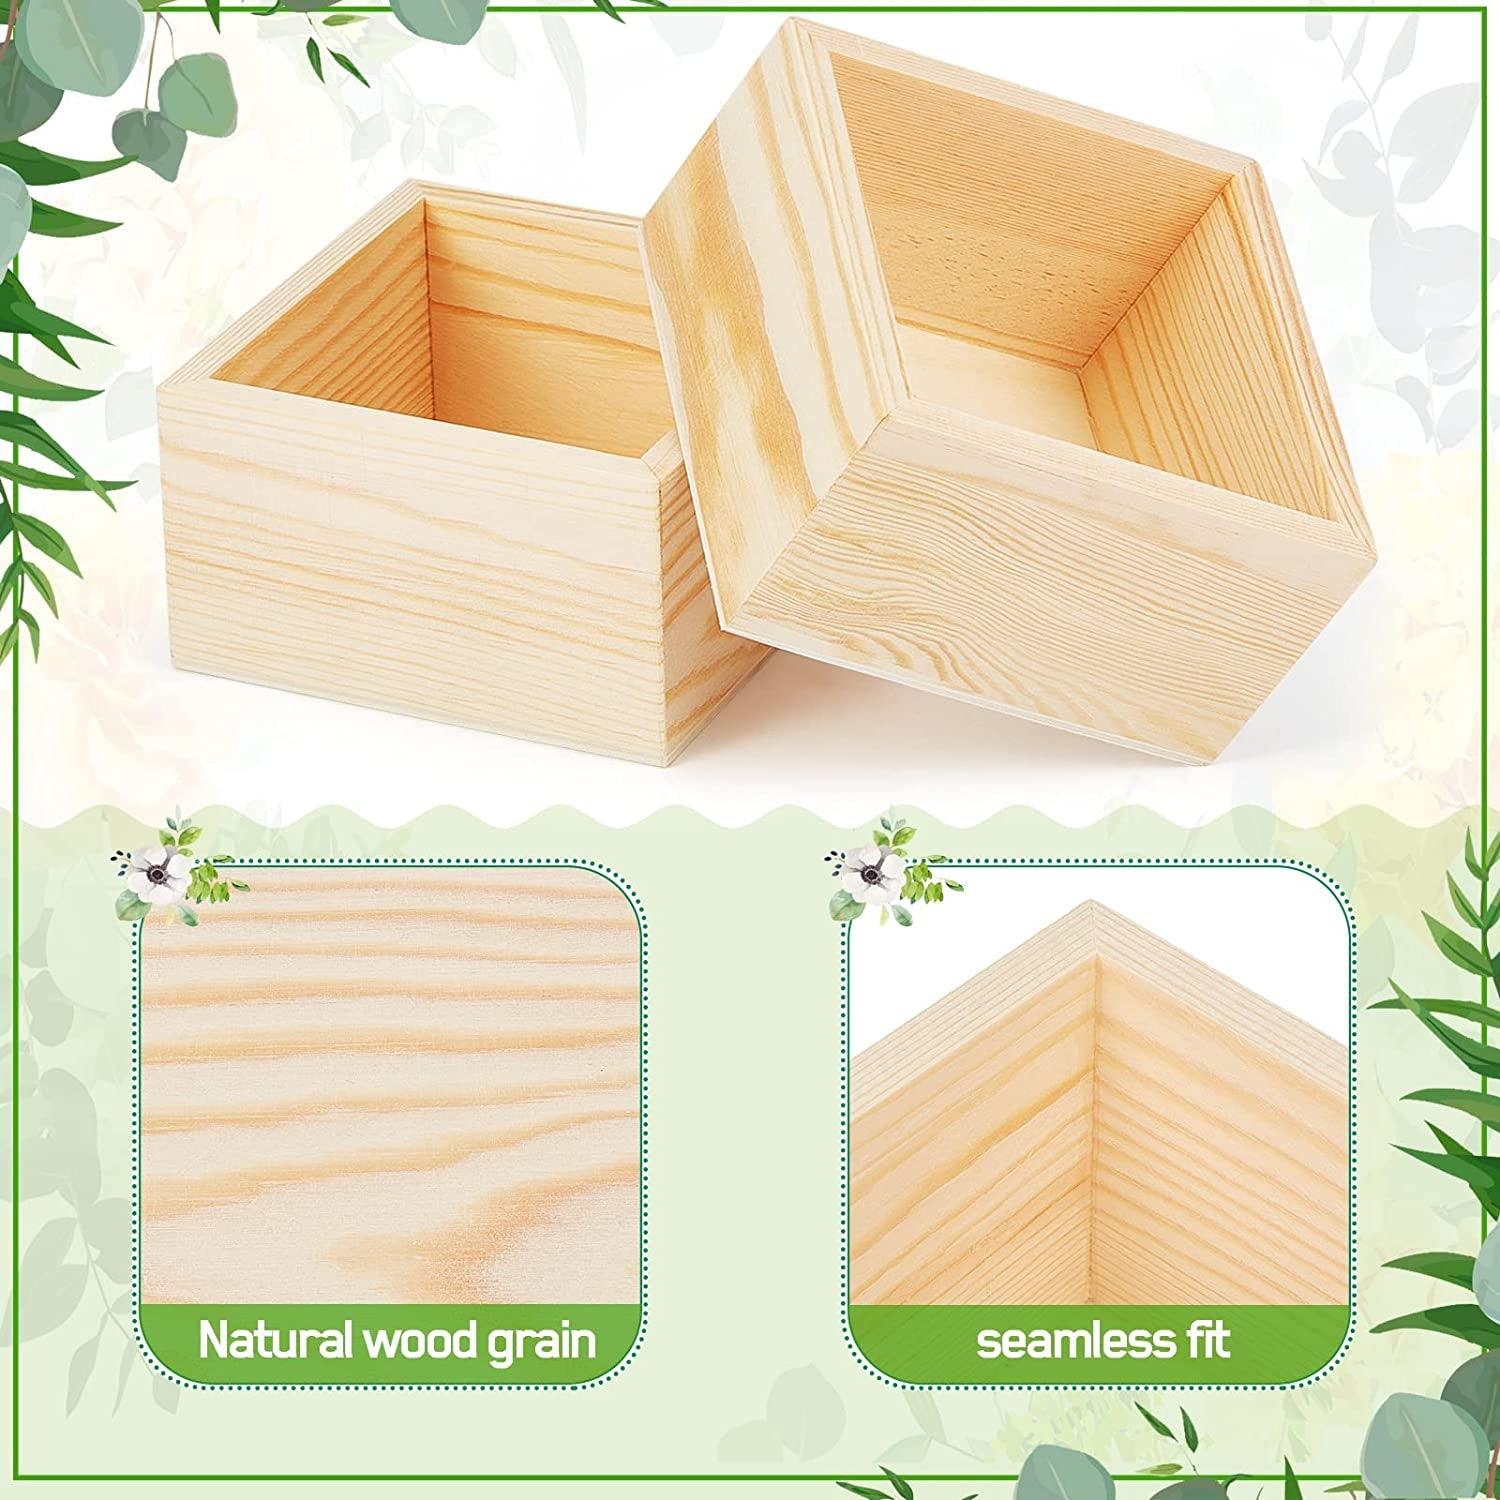 Wooden Boxes Rustic Unfinished Square Wood Box Crates for